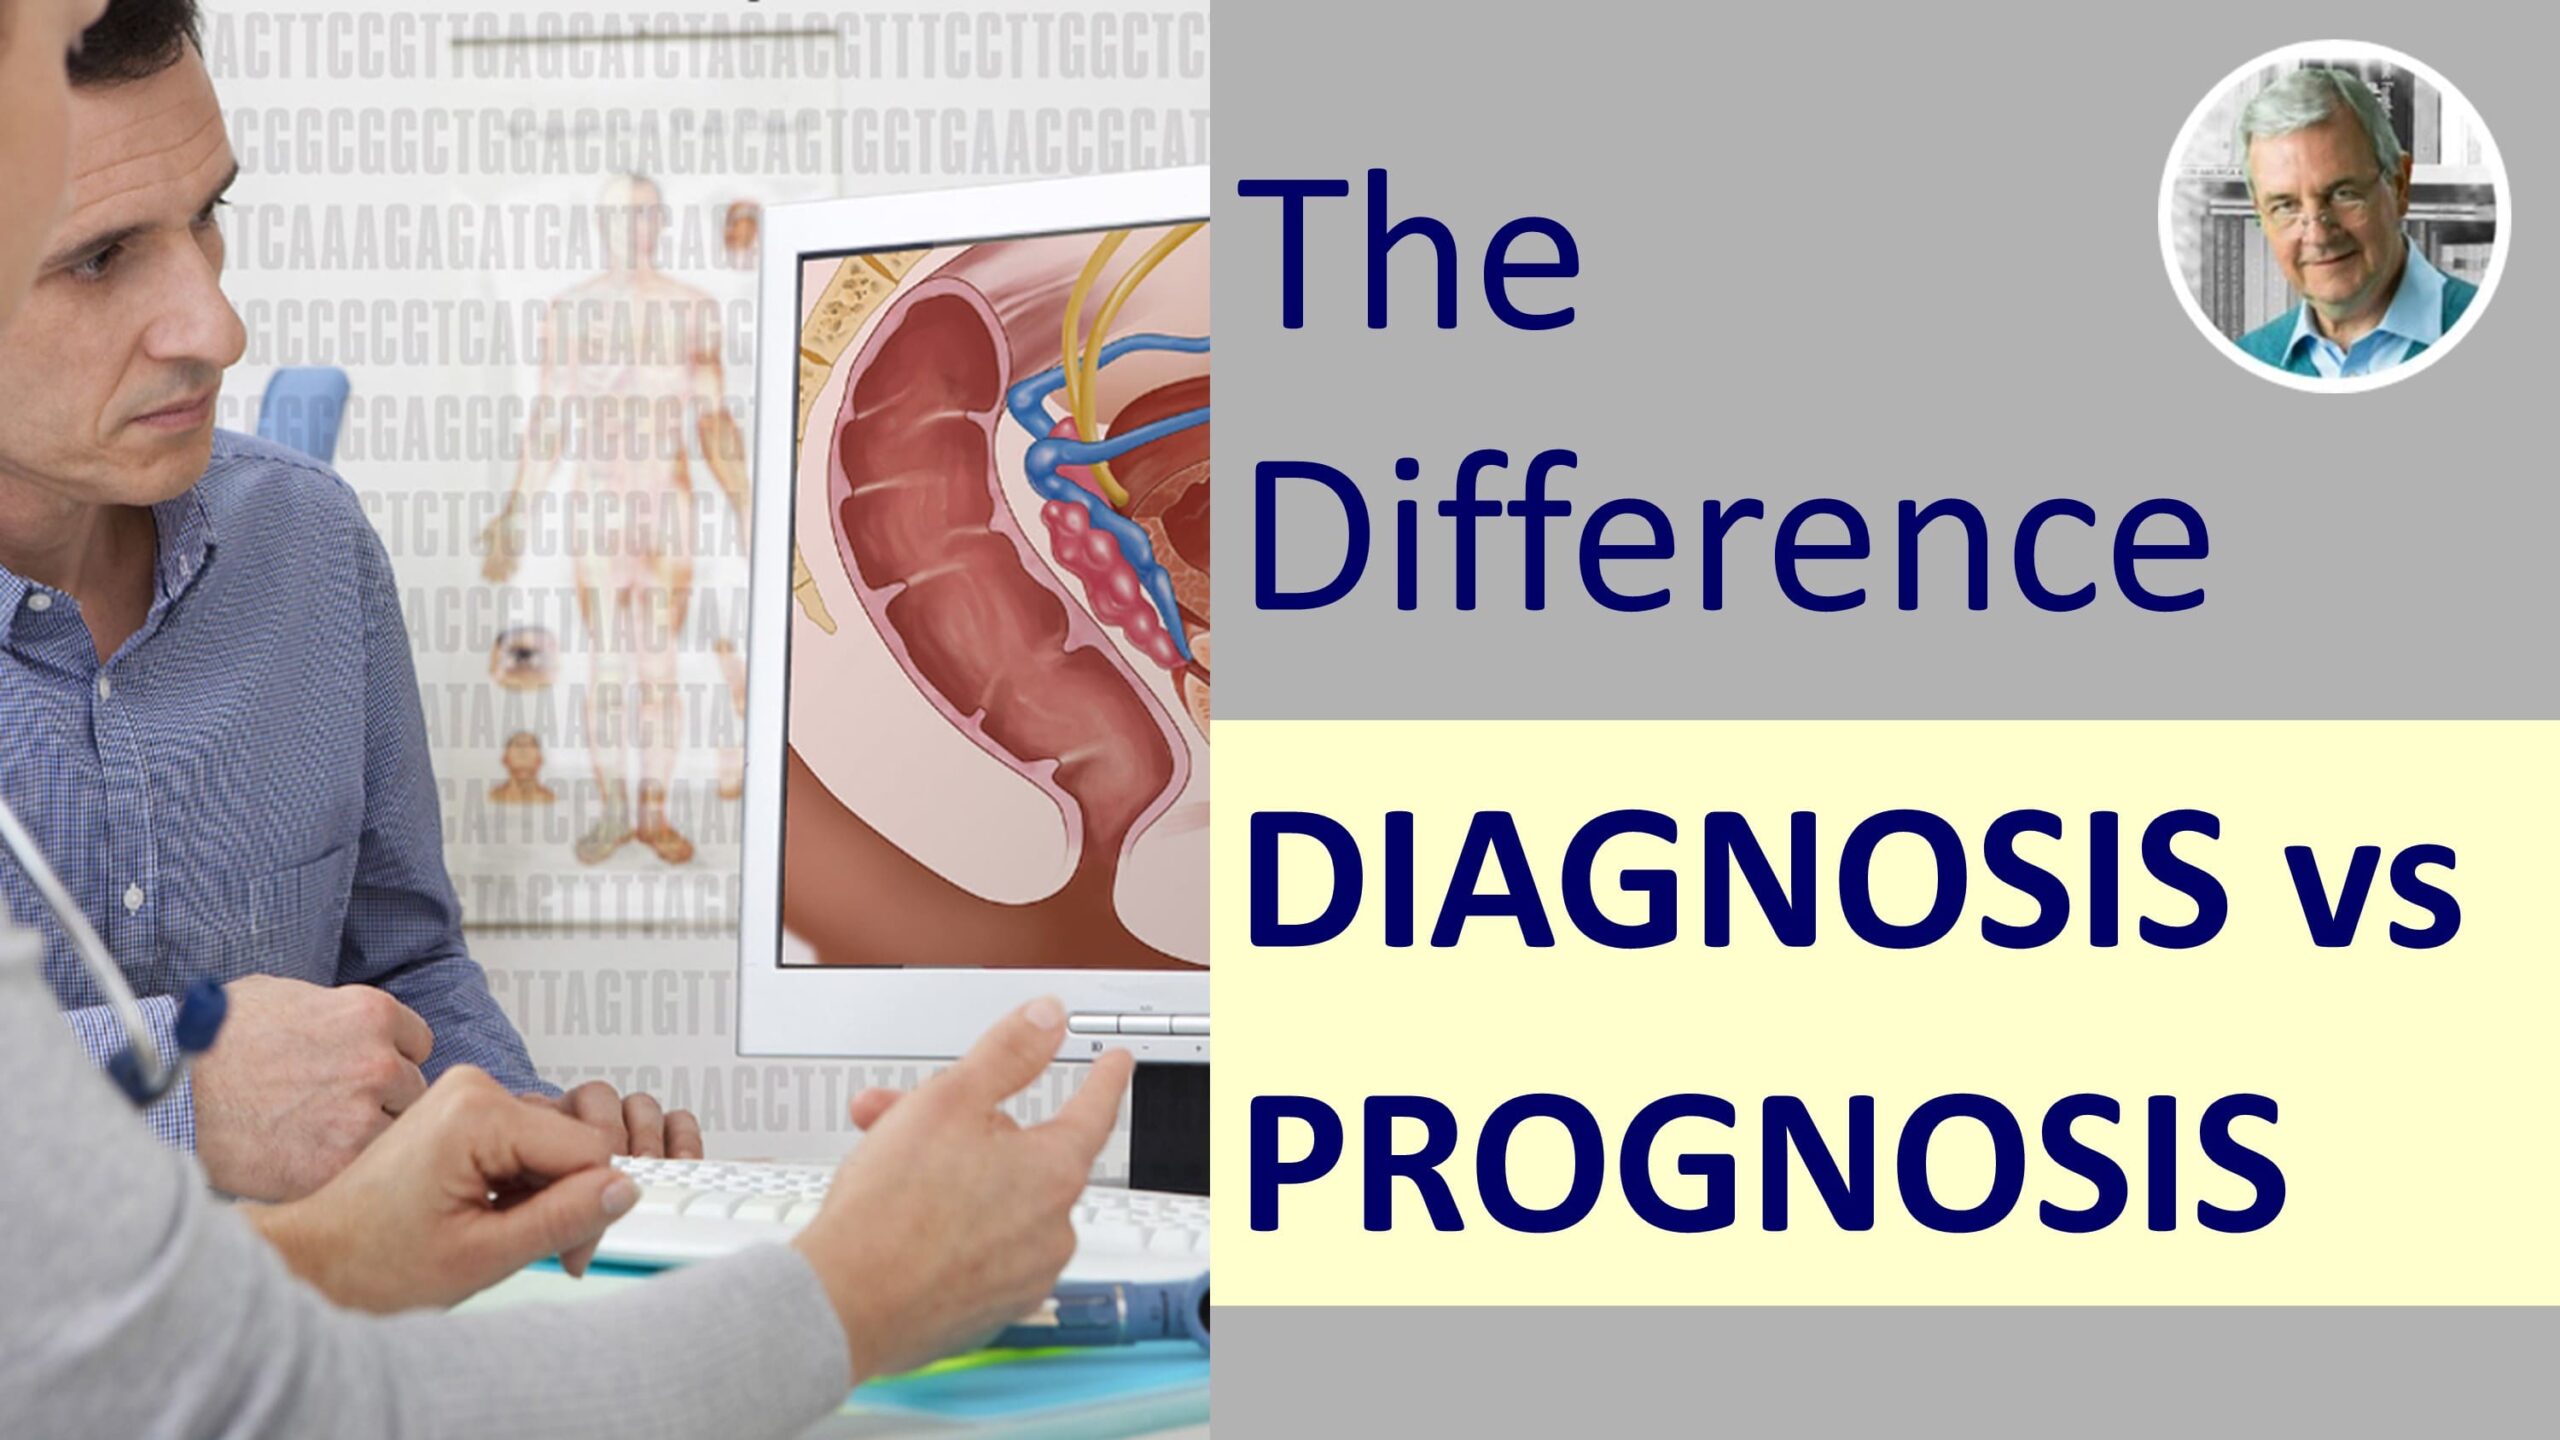 diagnosis prognosis - the difference